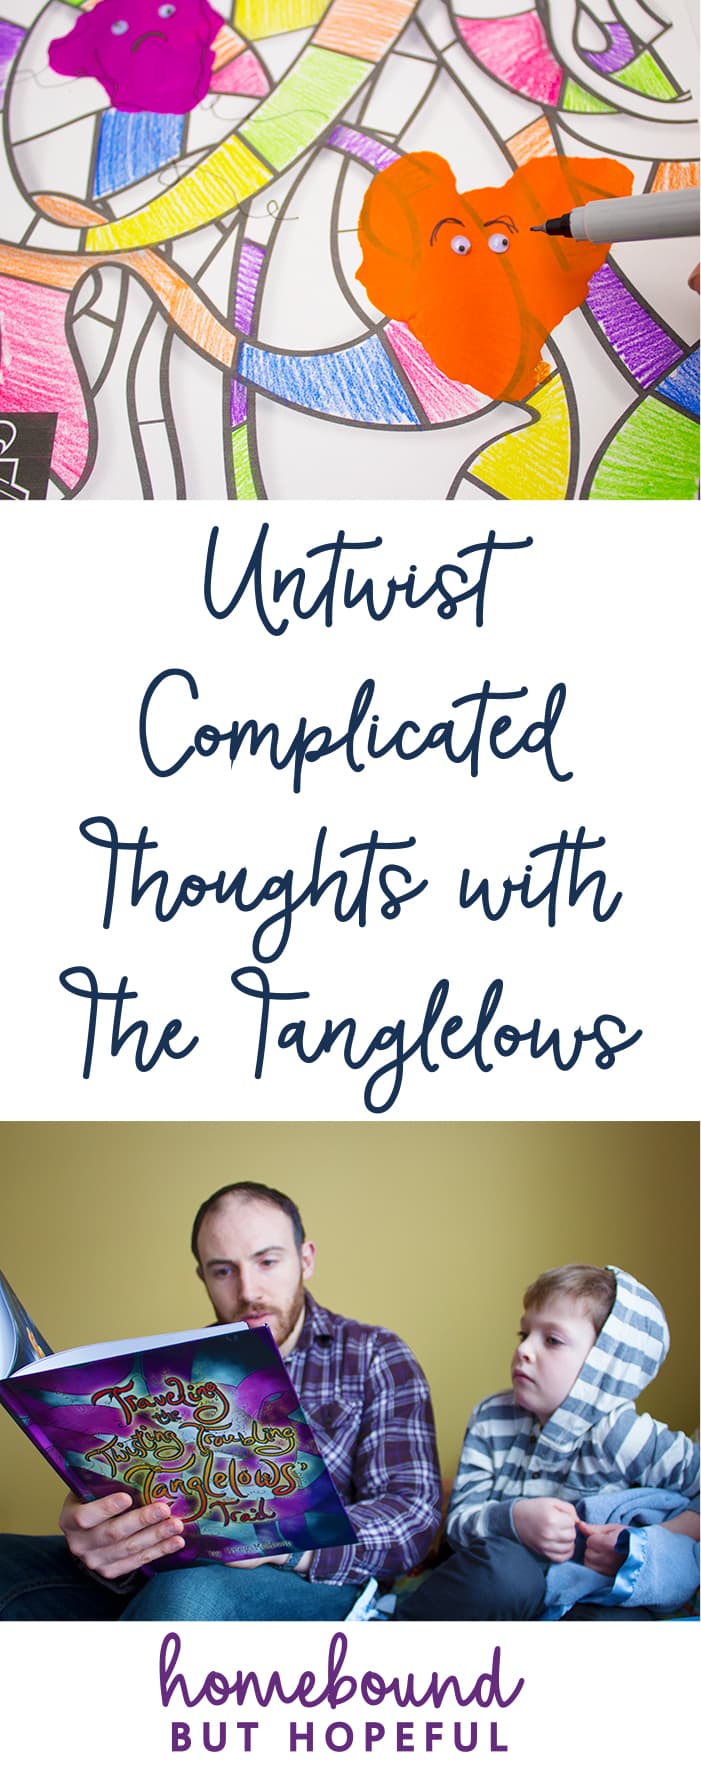 Kids have a lot on their minds these days, and tools to help them sort out their thoughts are incredibly helpful. Check out Greg McGoon's 'Traveling the Twisting Troubling Tanglelow's Trail' and the fun, simple art project it inspired.